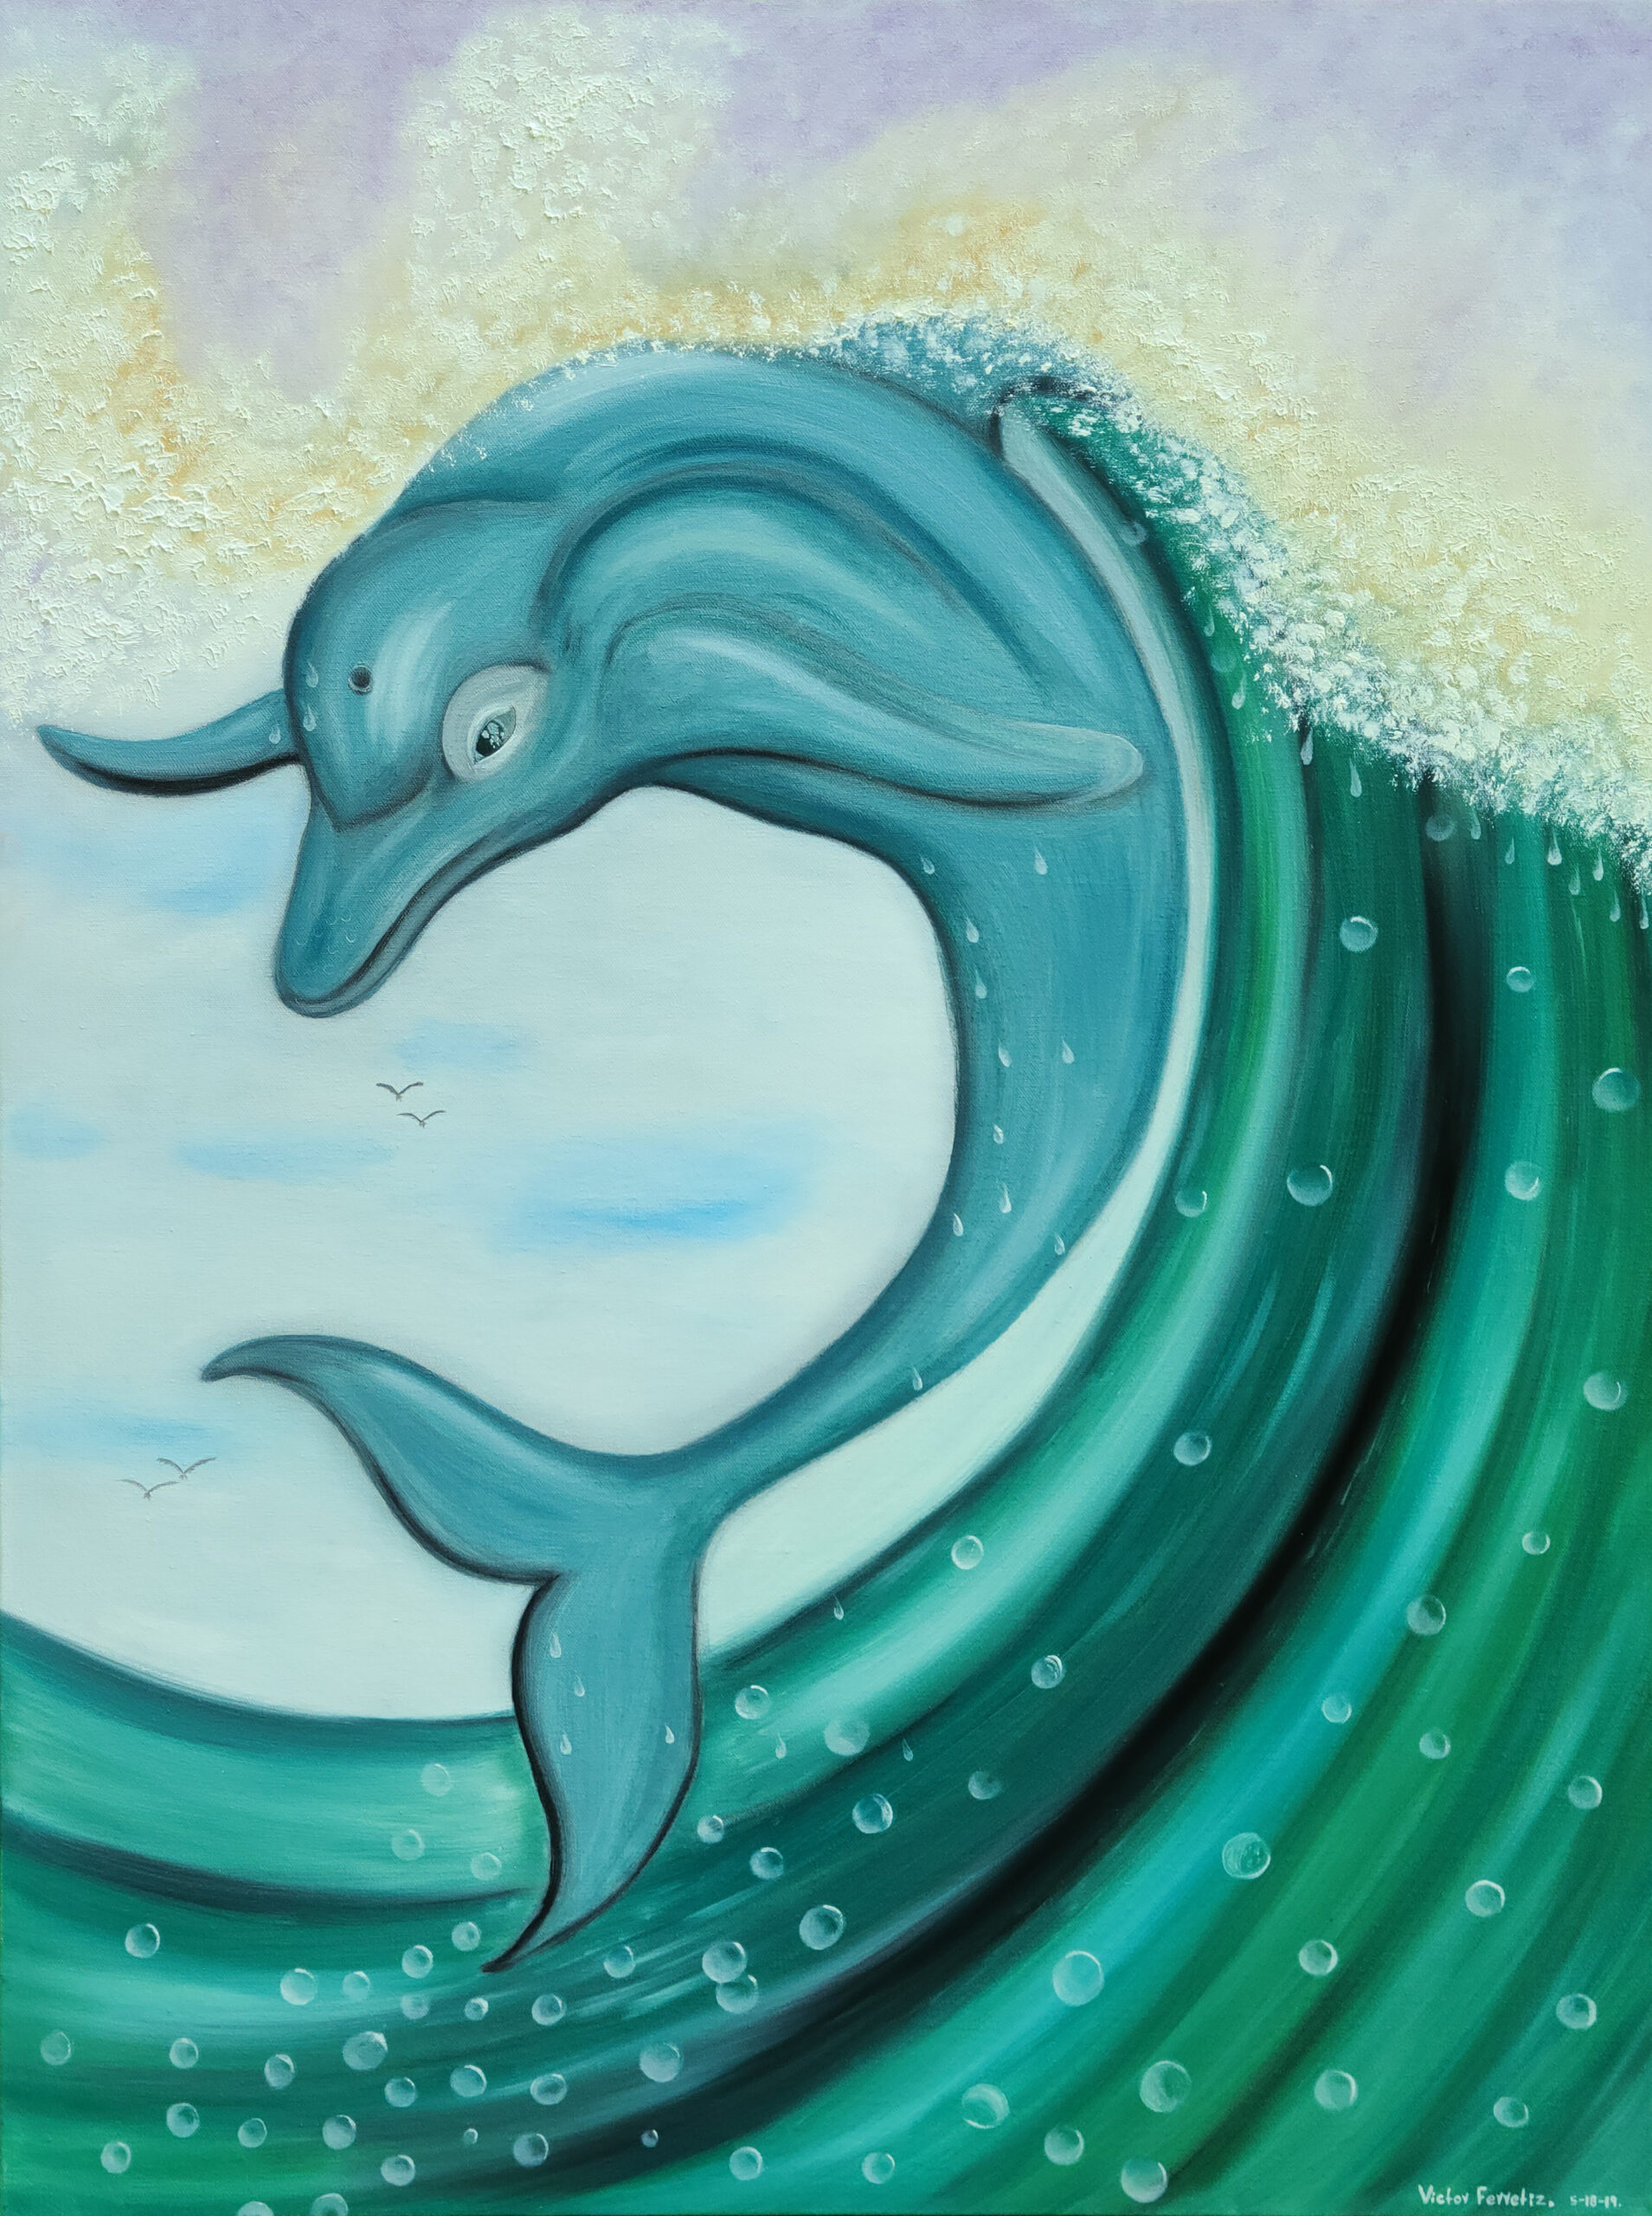 This original work of art represents the fidelity of certain animals of the mas, such as the dolphin, for example. These beautiful marine animals tend to be very friendly to people and are very protective in case of danger.